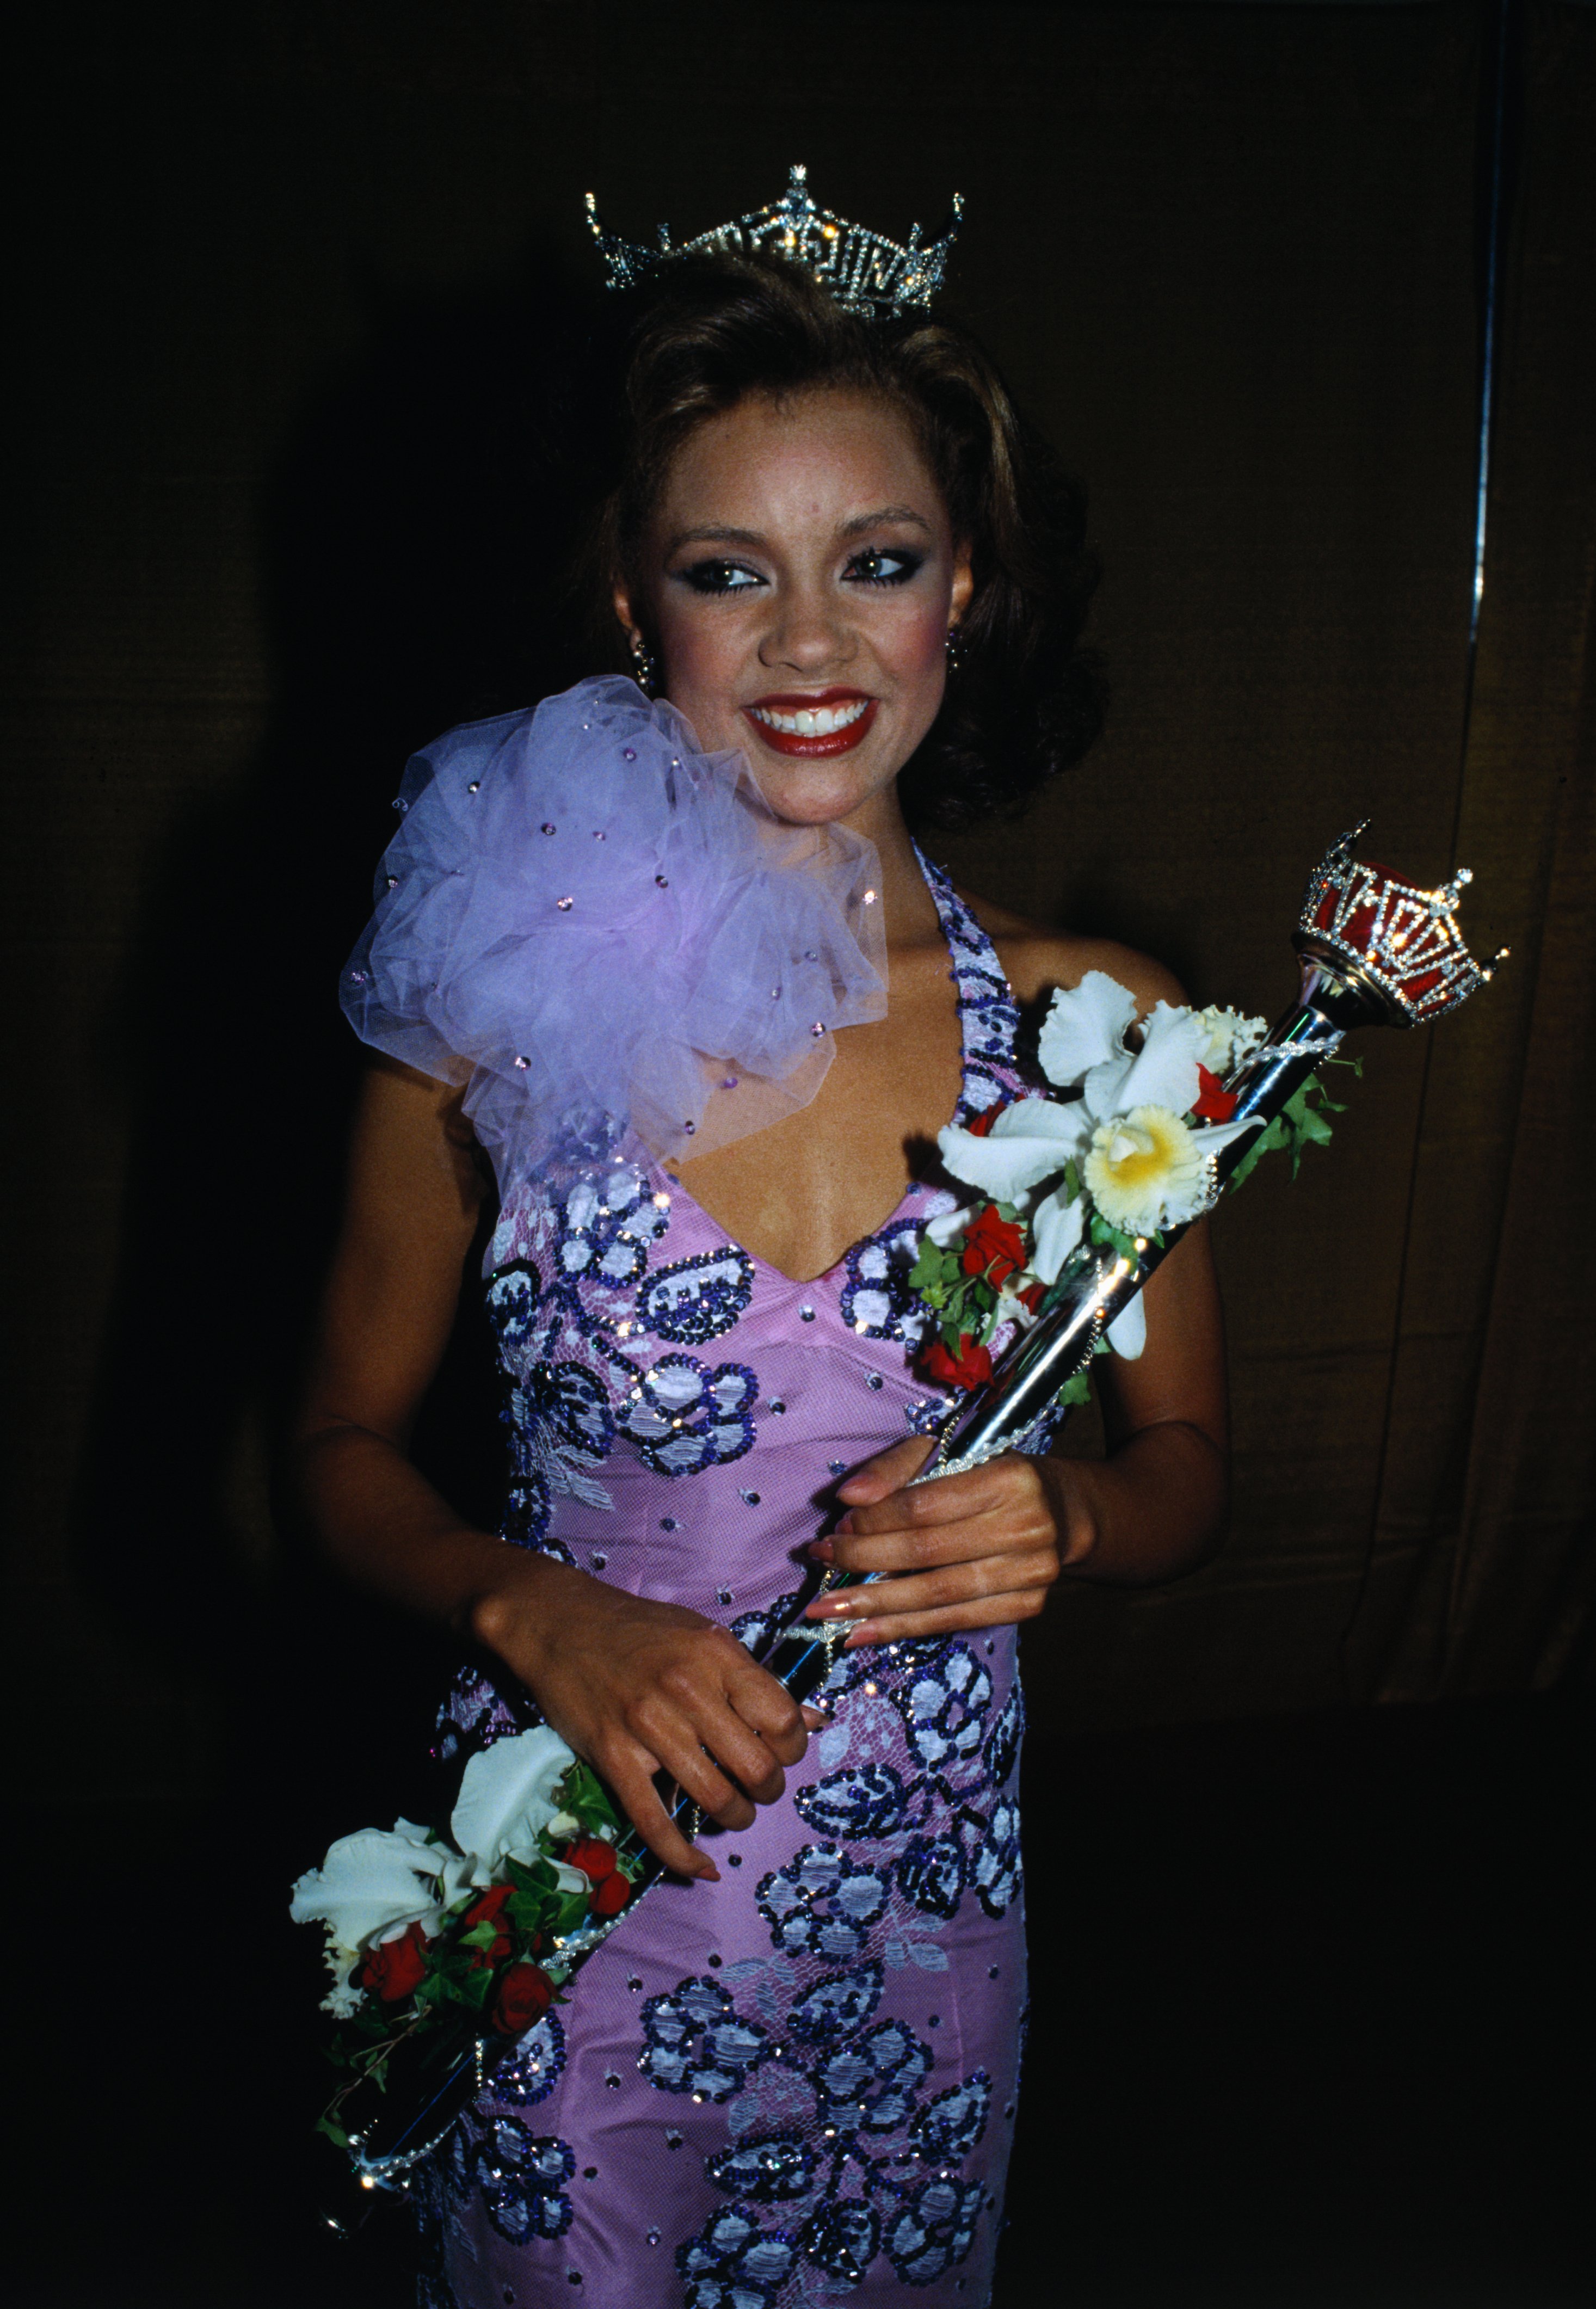 Miss America 1984, Vanessa Williams of New York, is all smiles as she poses for photographs after becoming the 63rd Miss America. | Photo: Getty Images